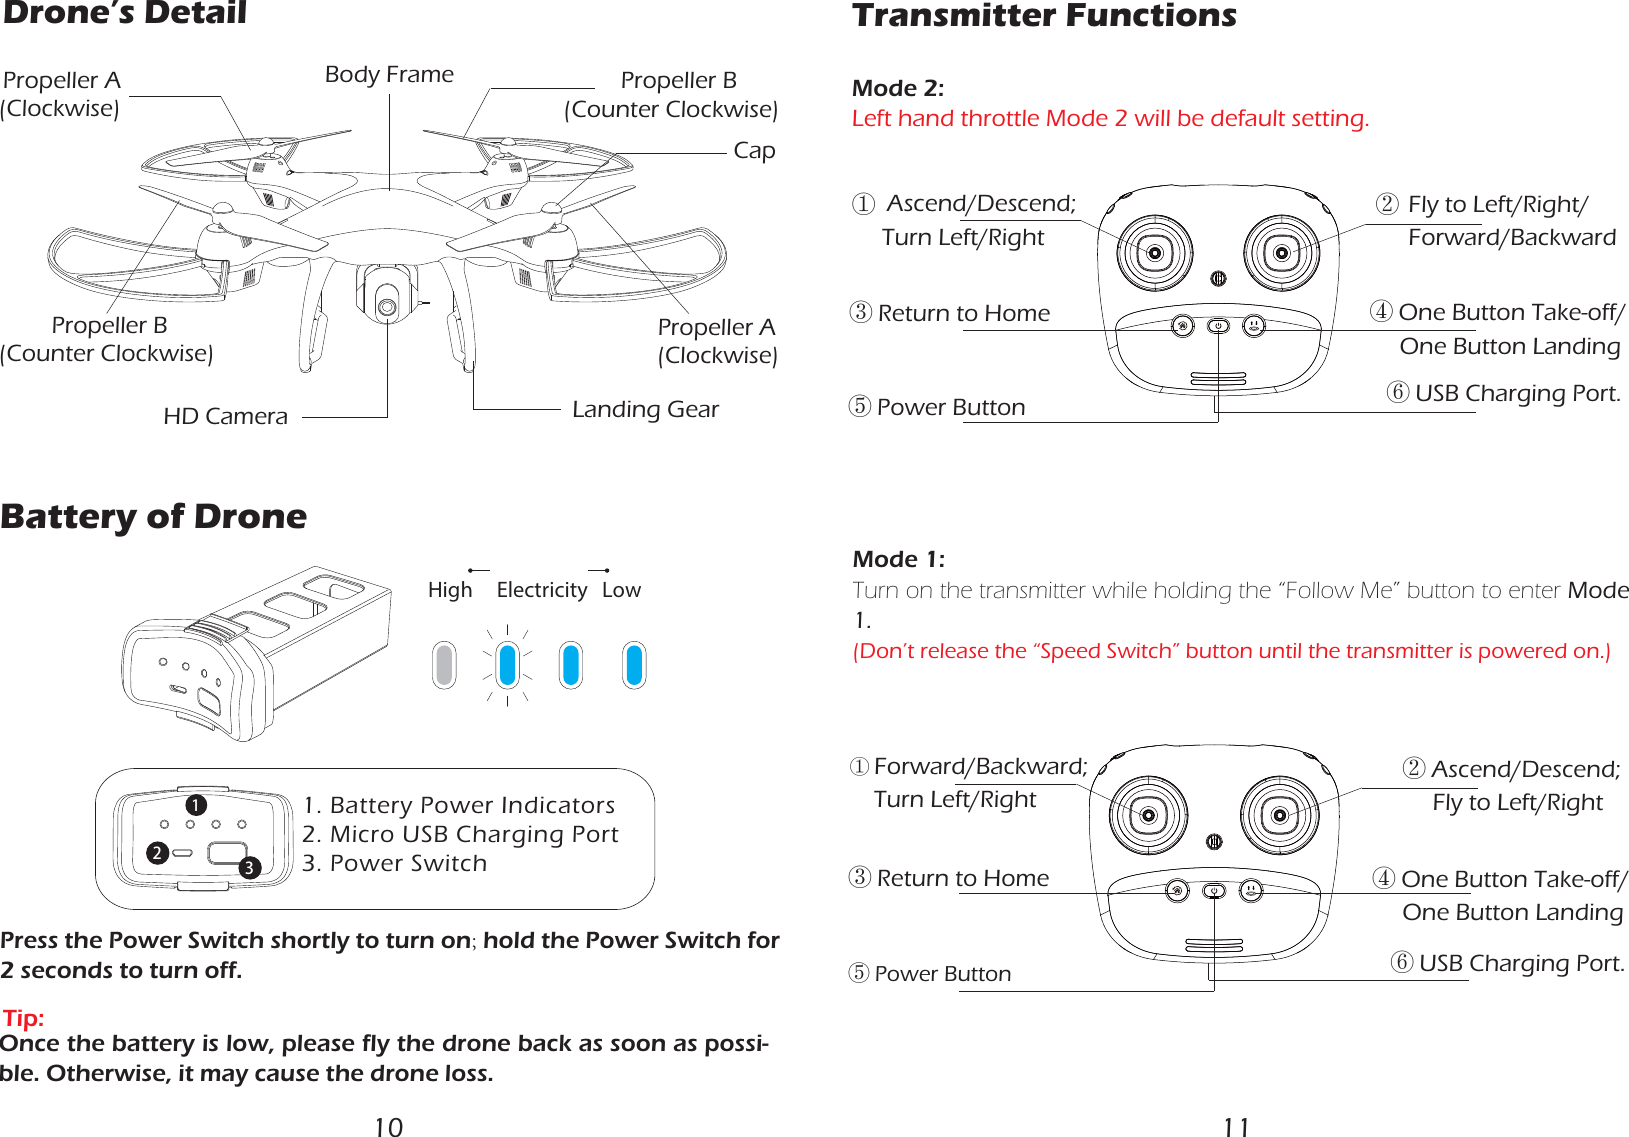 Drone’s Detail Transmitter Functions⑥ USB Charging Port.⑥ USB Charging Port. Ascend/Descend;Turn Left/RightFly to Left/Right/Forward/Backward③ Return to Home ④ One Button Take-off/     One Button Landing⑤ Power Button① Forward/Backward;    Turn Left/Right② Ascend/Descend;     Fly to Left/Right③ Return to Home ④ One Button Take-off/     One Button Landing⑤ Power ButtonMode 2:Left hand throttle Mode 2 will be default setting.①②Propeller A(Clockwise)Propeller A(Clockwise)        Propeller B        Propeller B(Counter Clockwise)(Counter Clockwise)High     Electricity   Low   1231. Battery Power Indicators2. Micro USB Charging Port3. Power Switch Battery of DroneTip:HD Camera Landing GearBody FrameCapPress the Power Switch shortly to turn on; hold the Power Switch for 2 seconds to turn off.Once the battery is low, please fly the drone back as soon as possi-ble. Otherwise, it may cause the drone loss.10 11Mode 1:Turn on the transmitter while holding the “Follow Me” button to enter Mode 1.(Don’t release the “Speed Switch” button until the transmitter is powered on.)